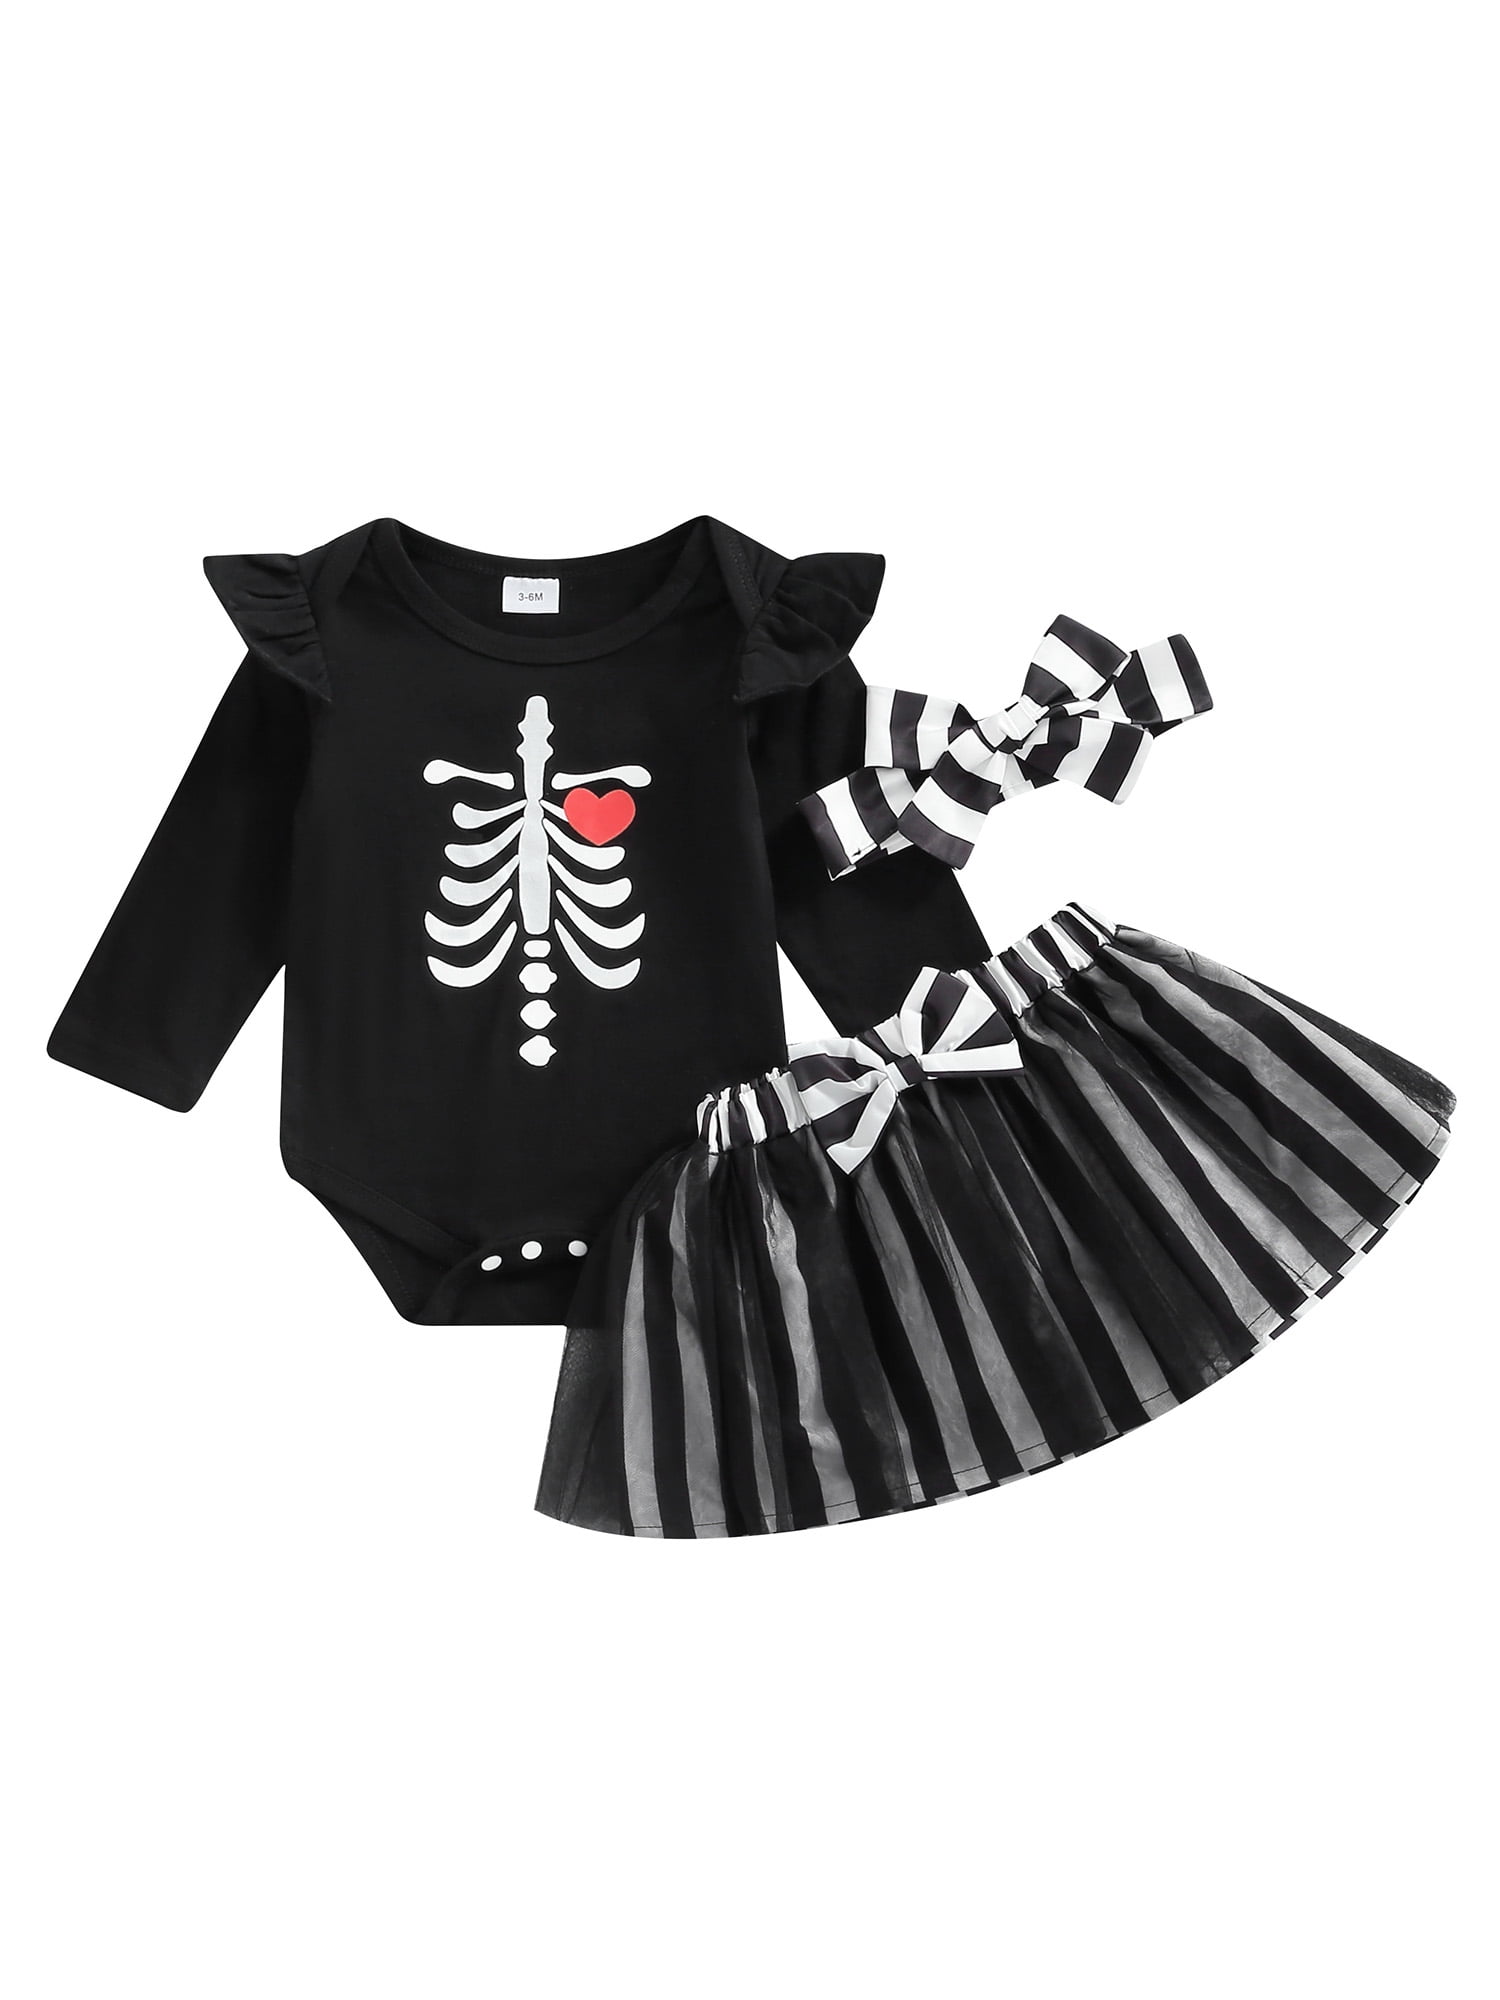 Halloween Baby Boy Girl Long Sleeve Skeleton Print Romper Hat Party Outfits Set 